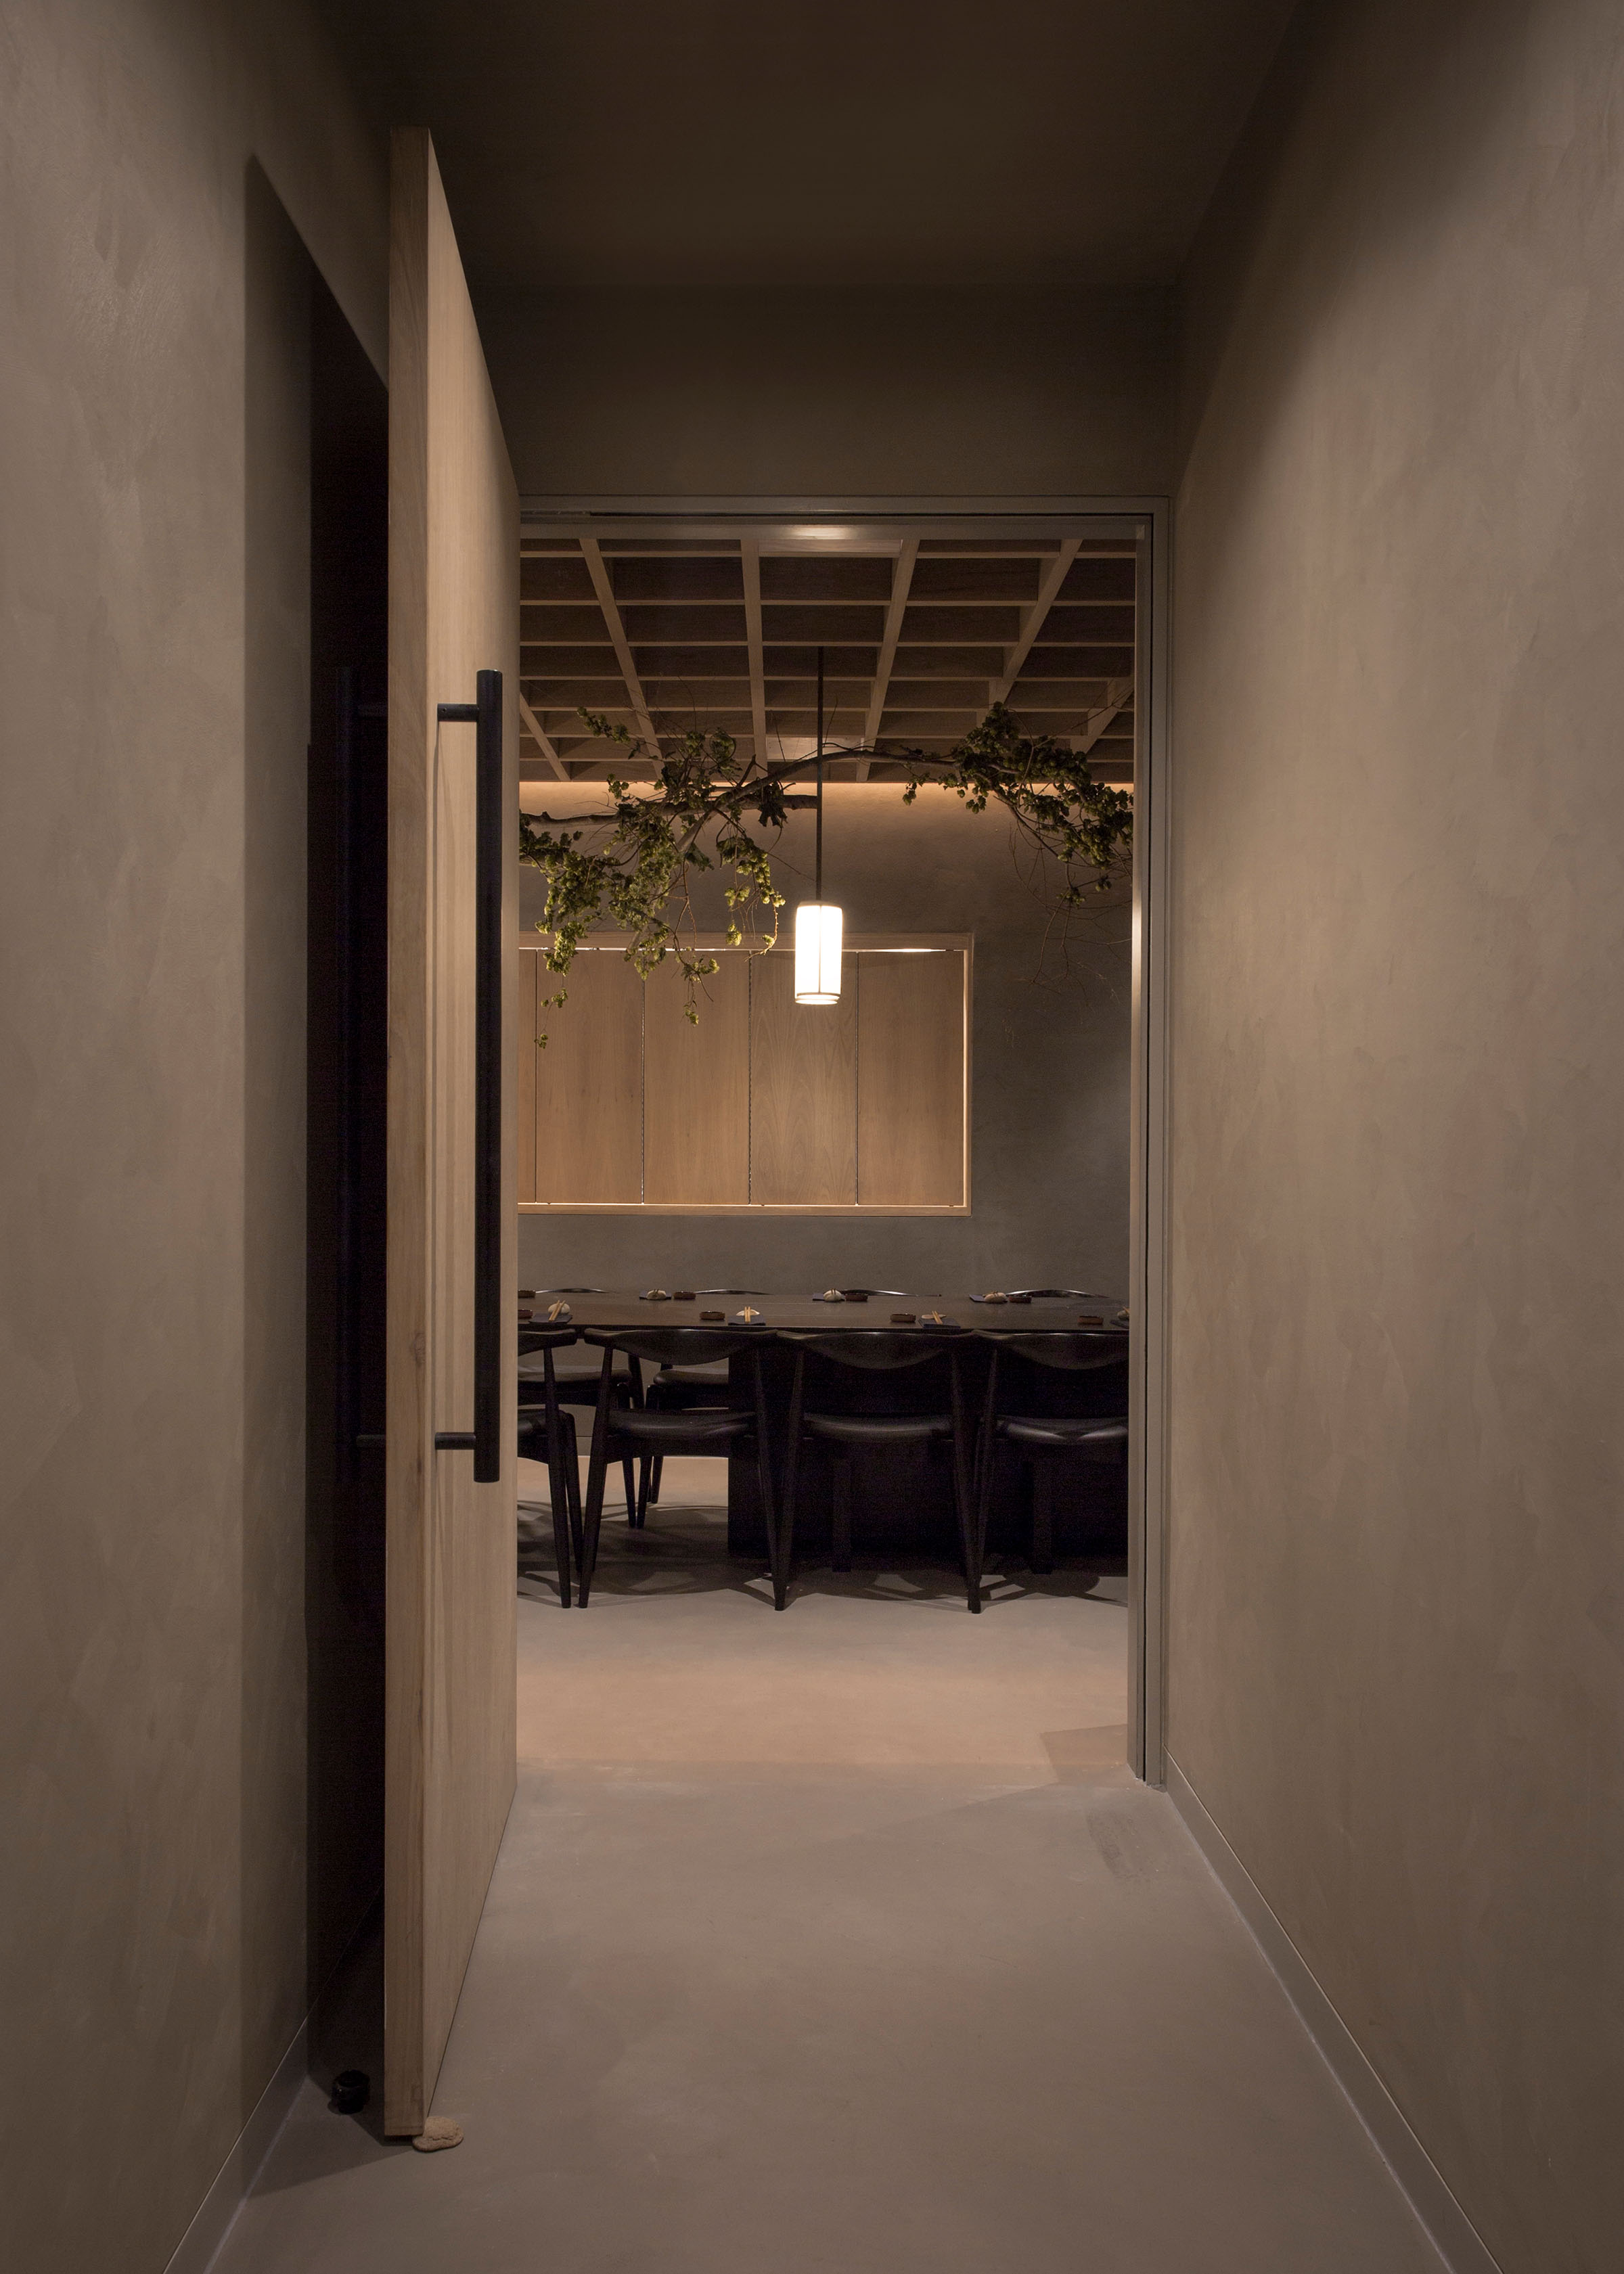 Sticks'n'Sushi London — Japanese and Scandinavian restaurant design by Norm Architects